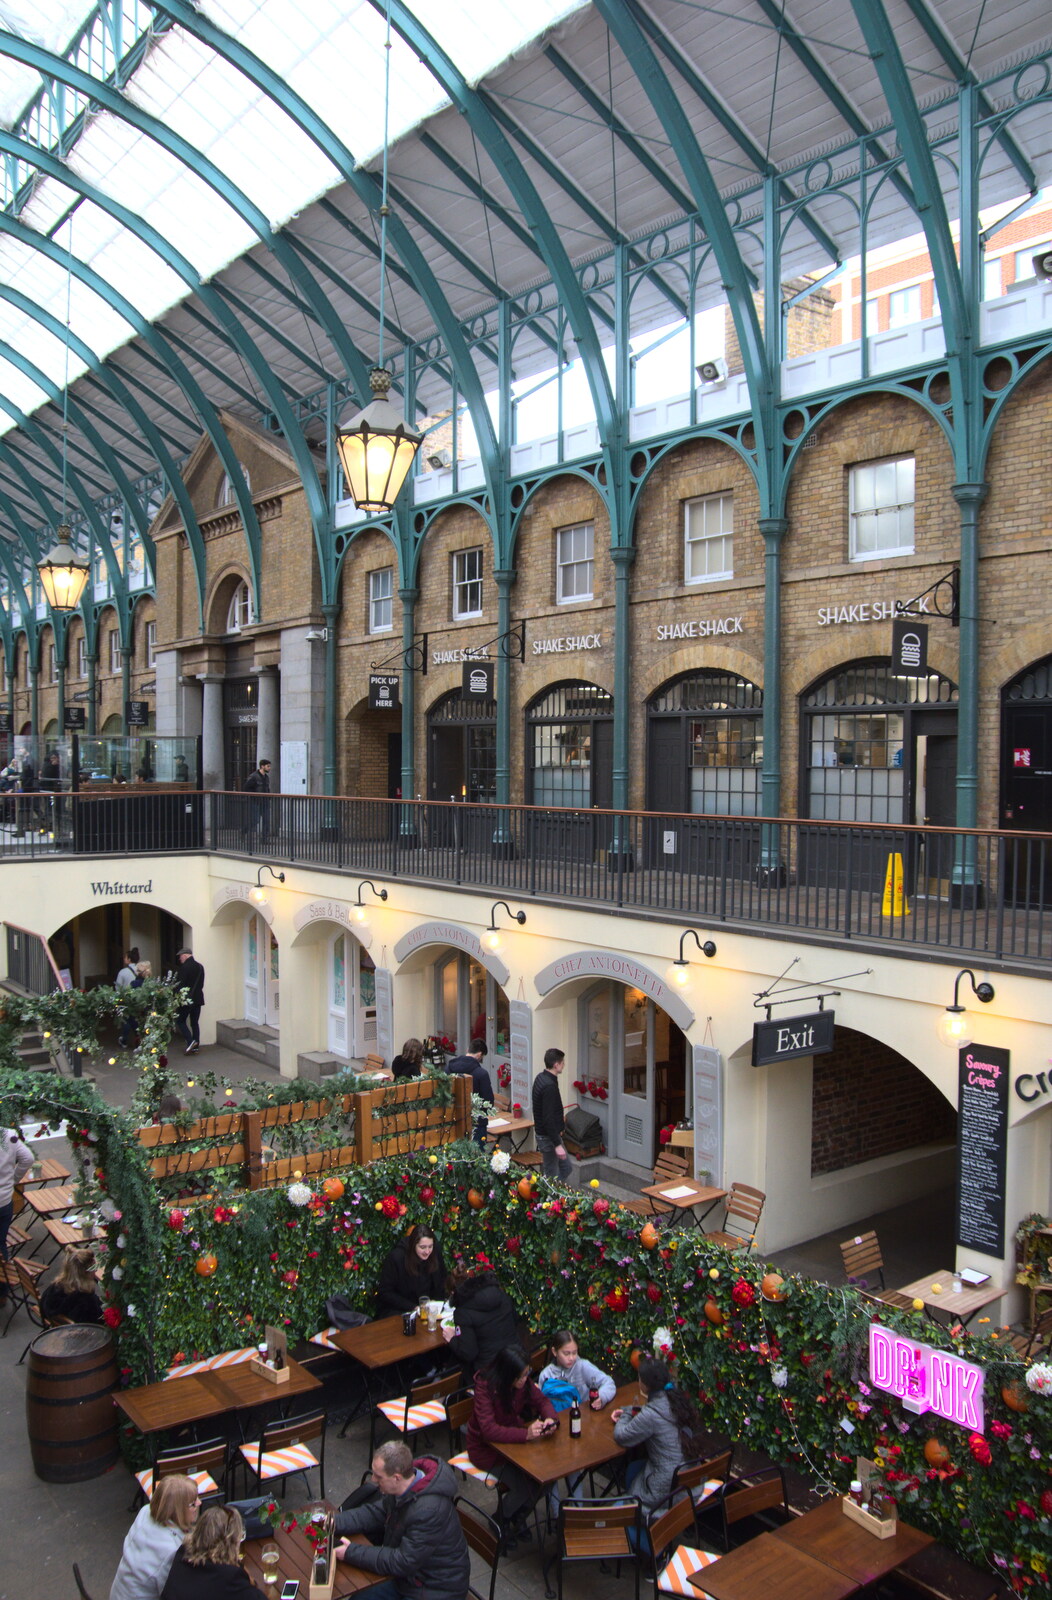 Inside the old market from A SwiftKey Memorial Service, Covent Garden, London  - 13th March 2020